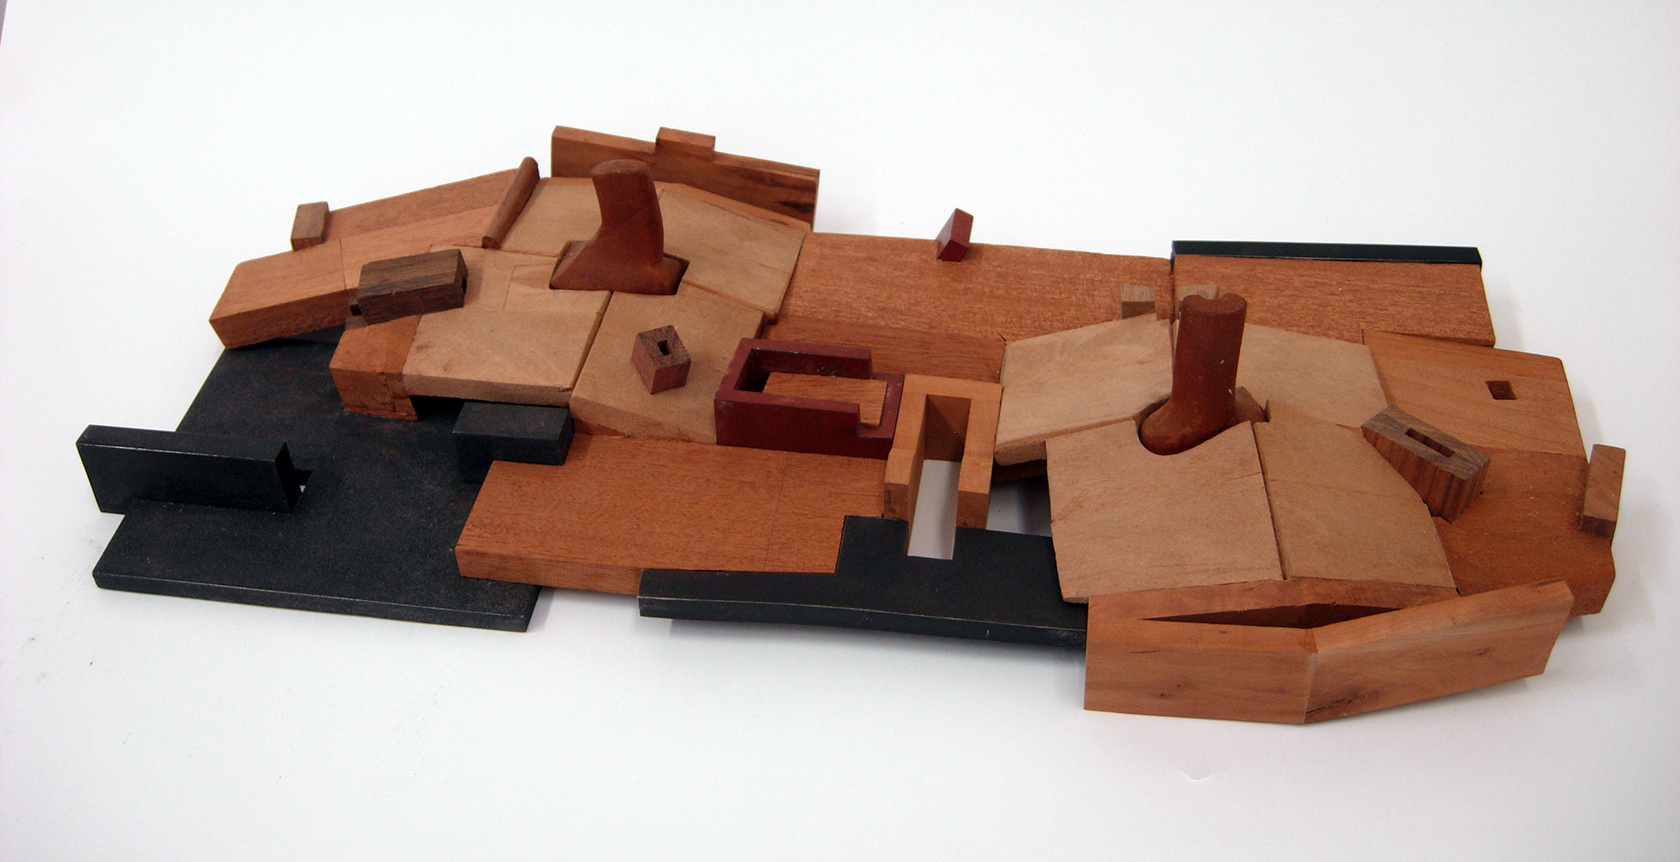 Different shapes of brown and black wood blocks form a landscape-like sculpture